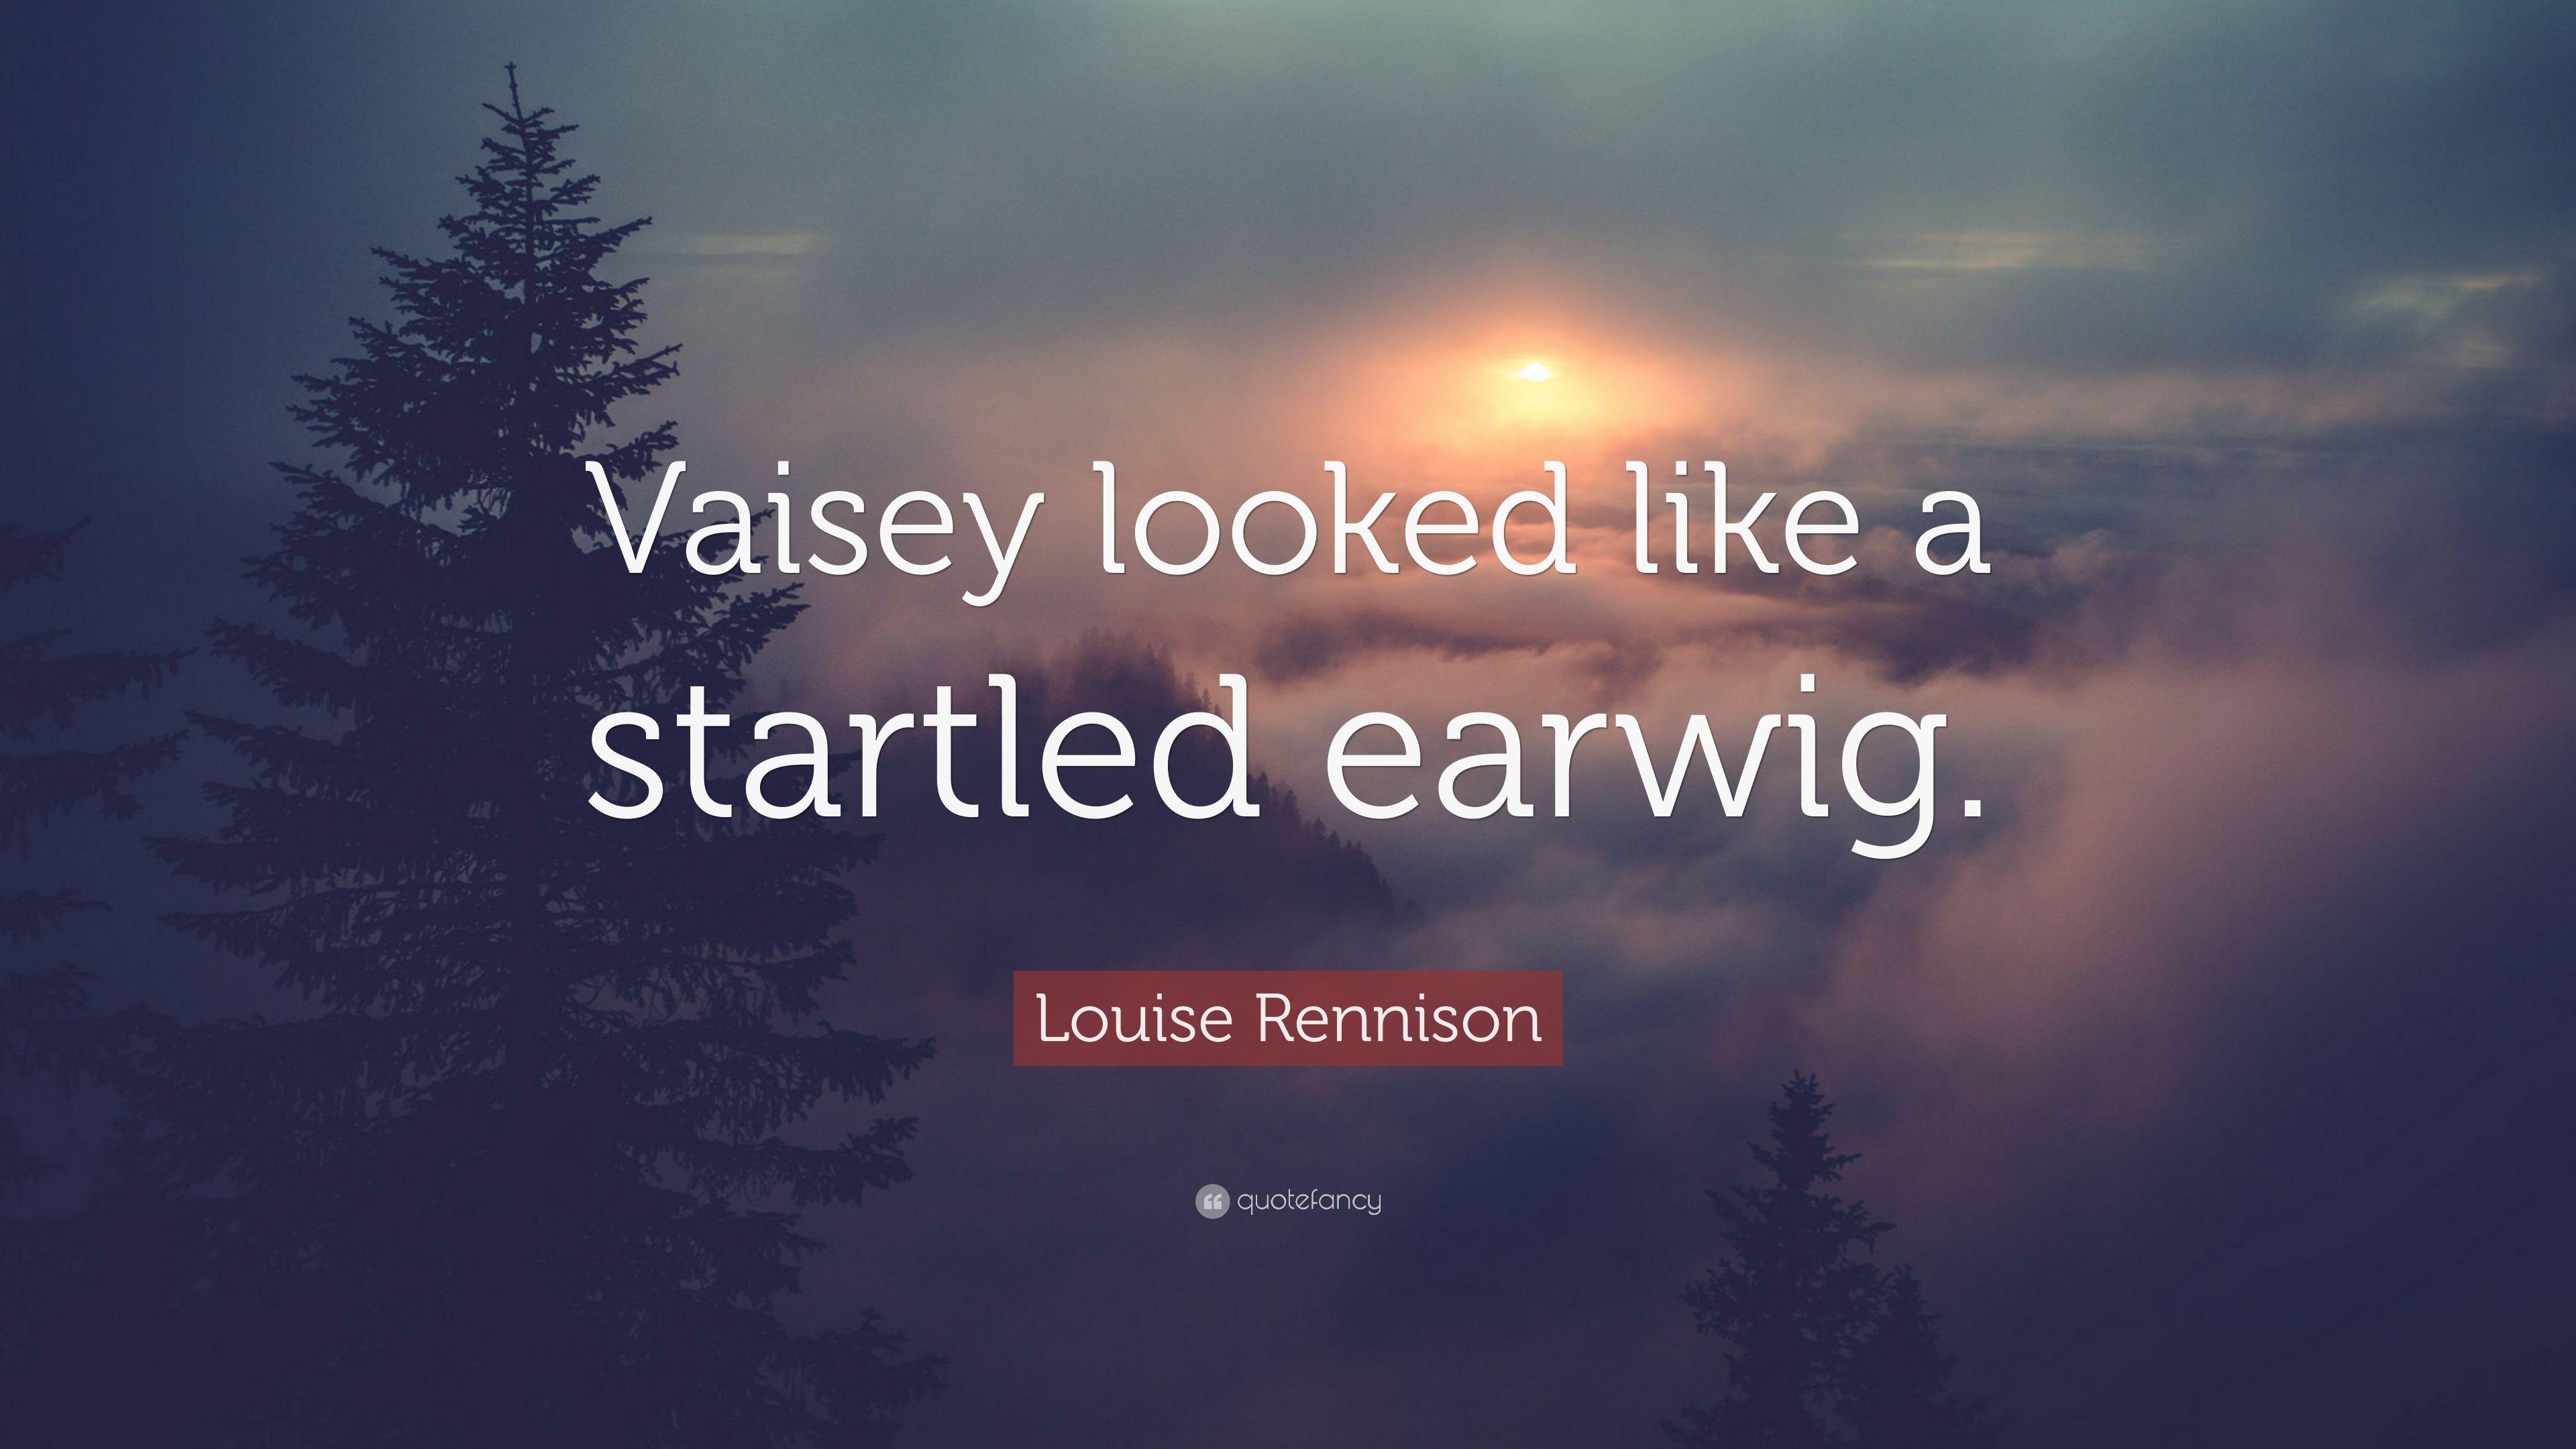 Louise Rennison Quote: “Vaisey looked like a startled earwig